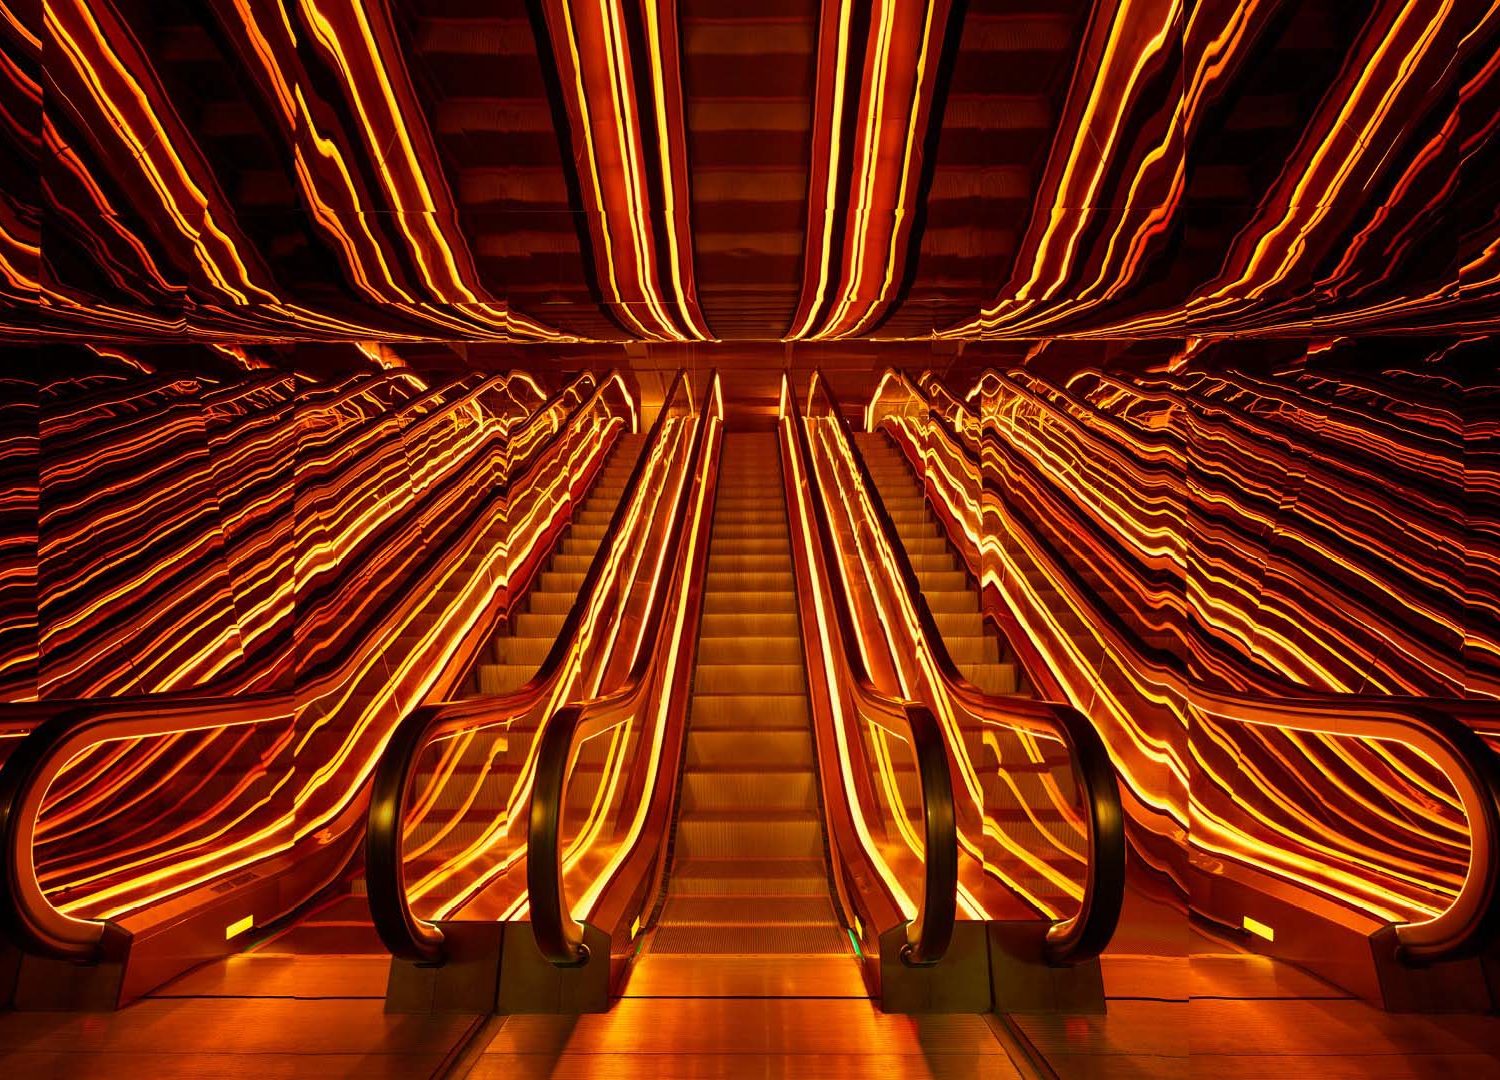 PUBLIC The iconic escalators you will never get tired of photographing